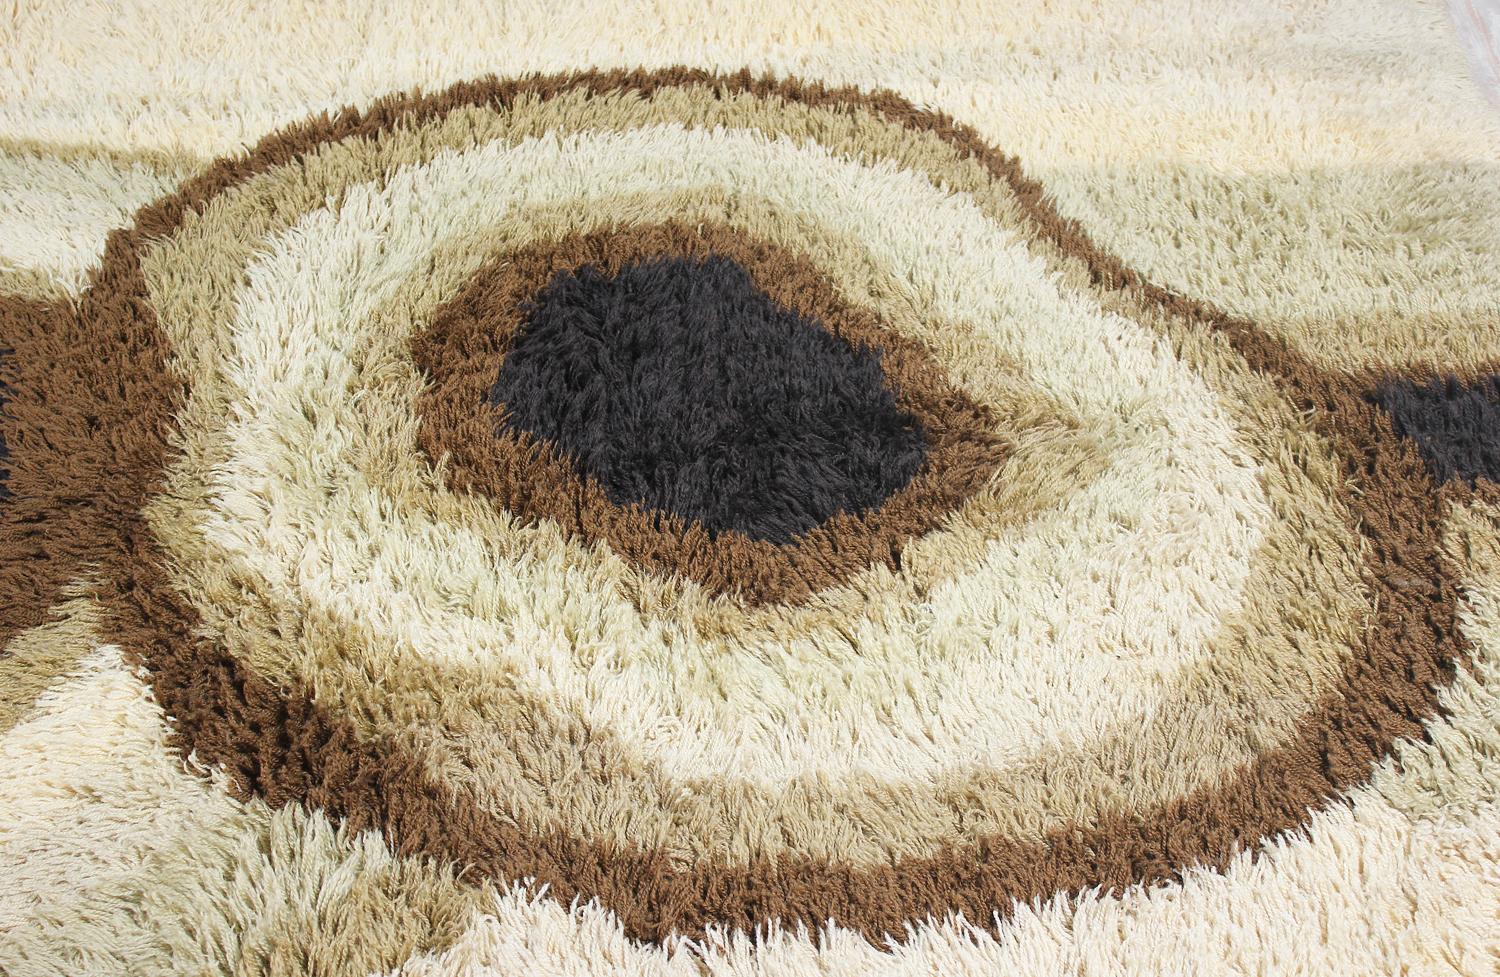 Large rug designed by Carin Agner Nielsen for Ege Rya in Denmark circa 1960’s. Crafted by Denmark’s most successful rug producer, this unique and decorative Nordic design features a hand-knotted wool technique with a circular design in earthy tones